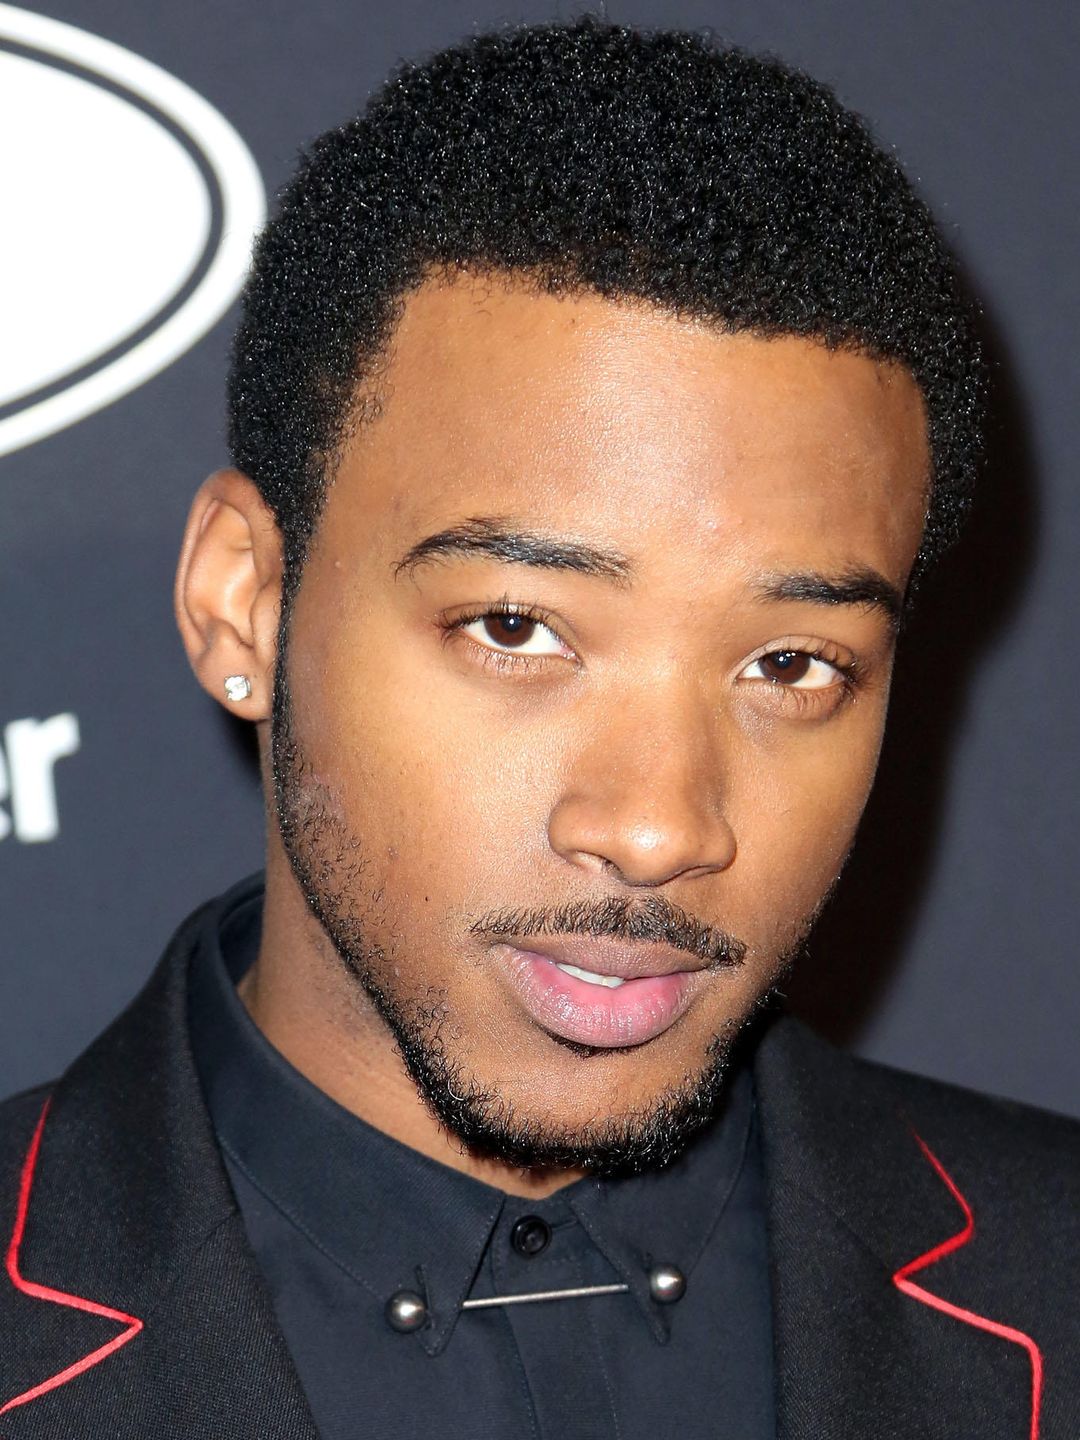 Algee Smith who is his father